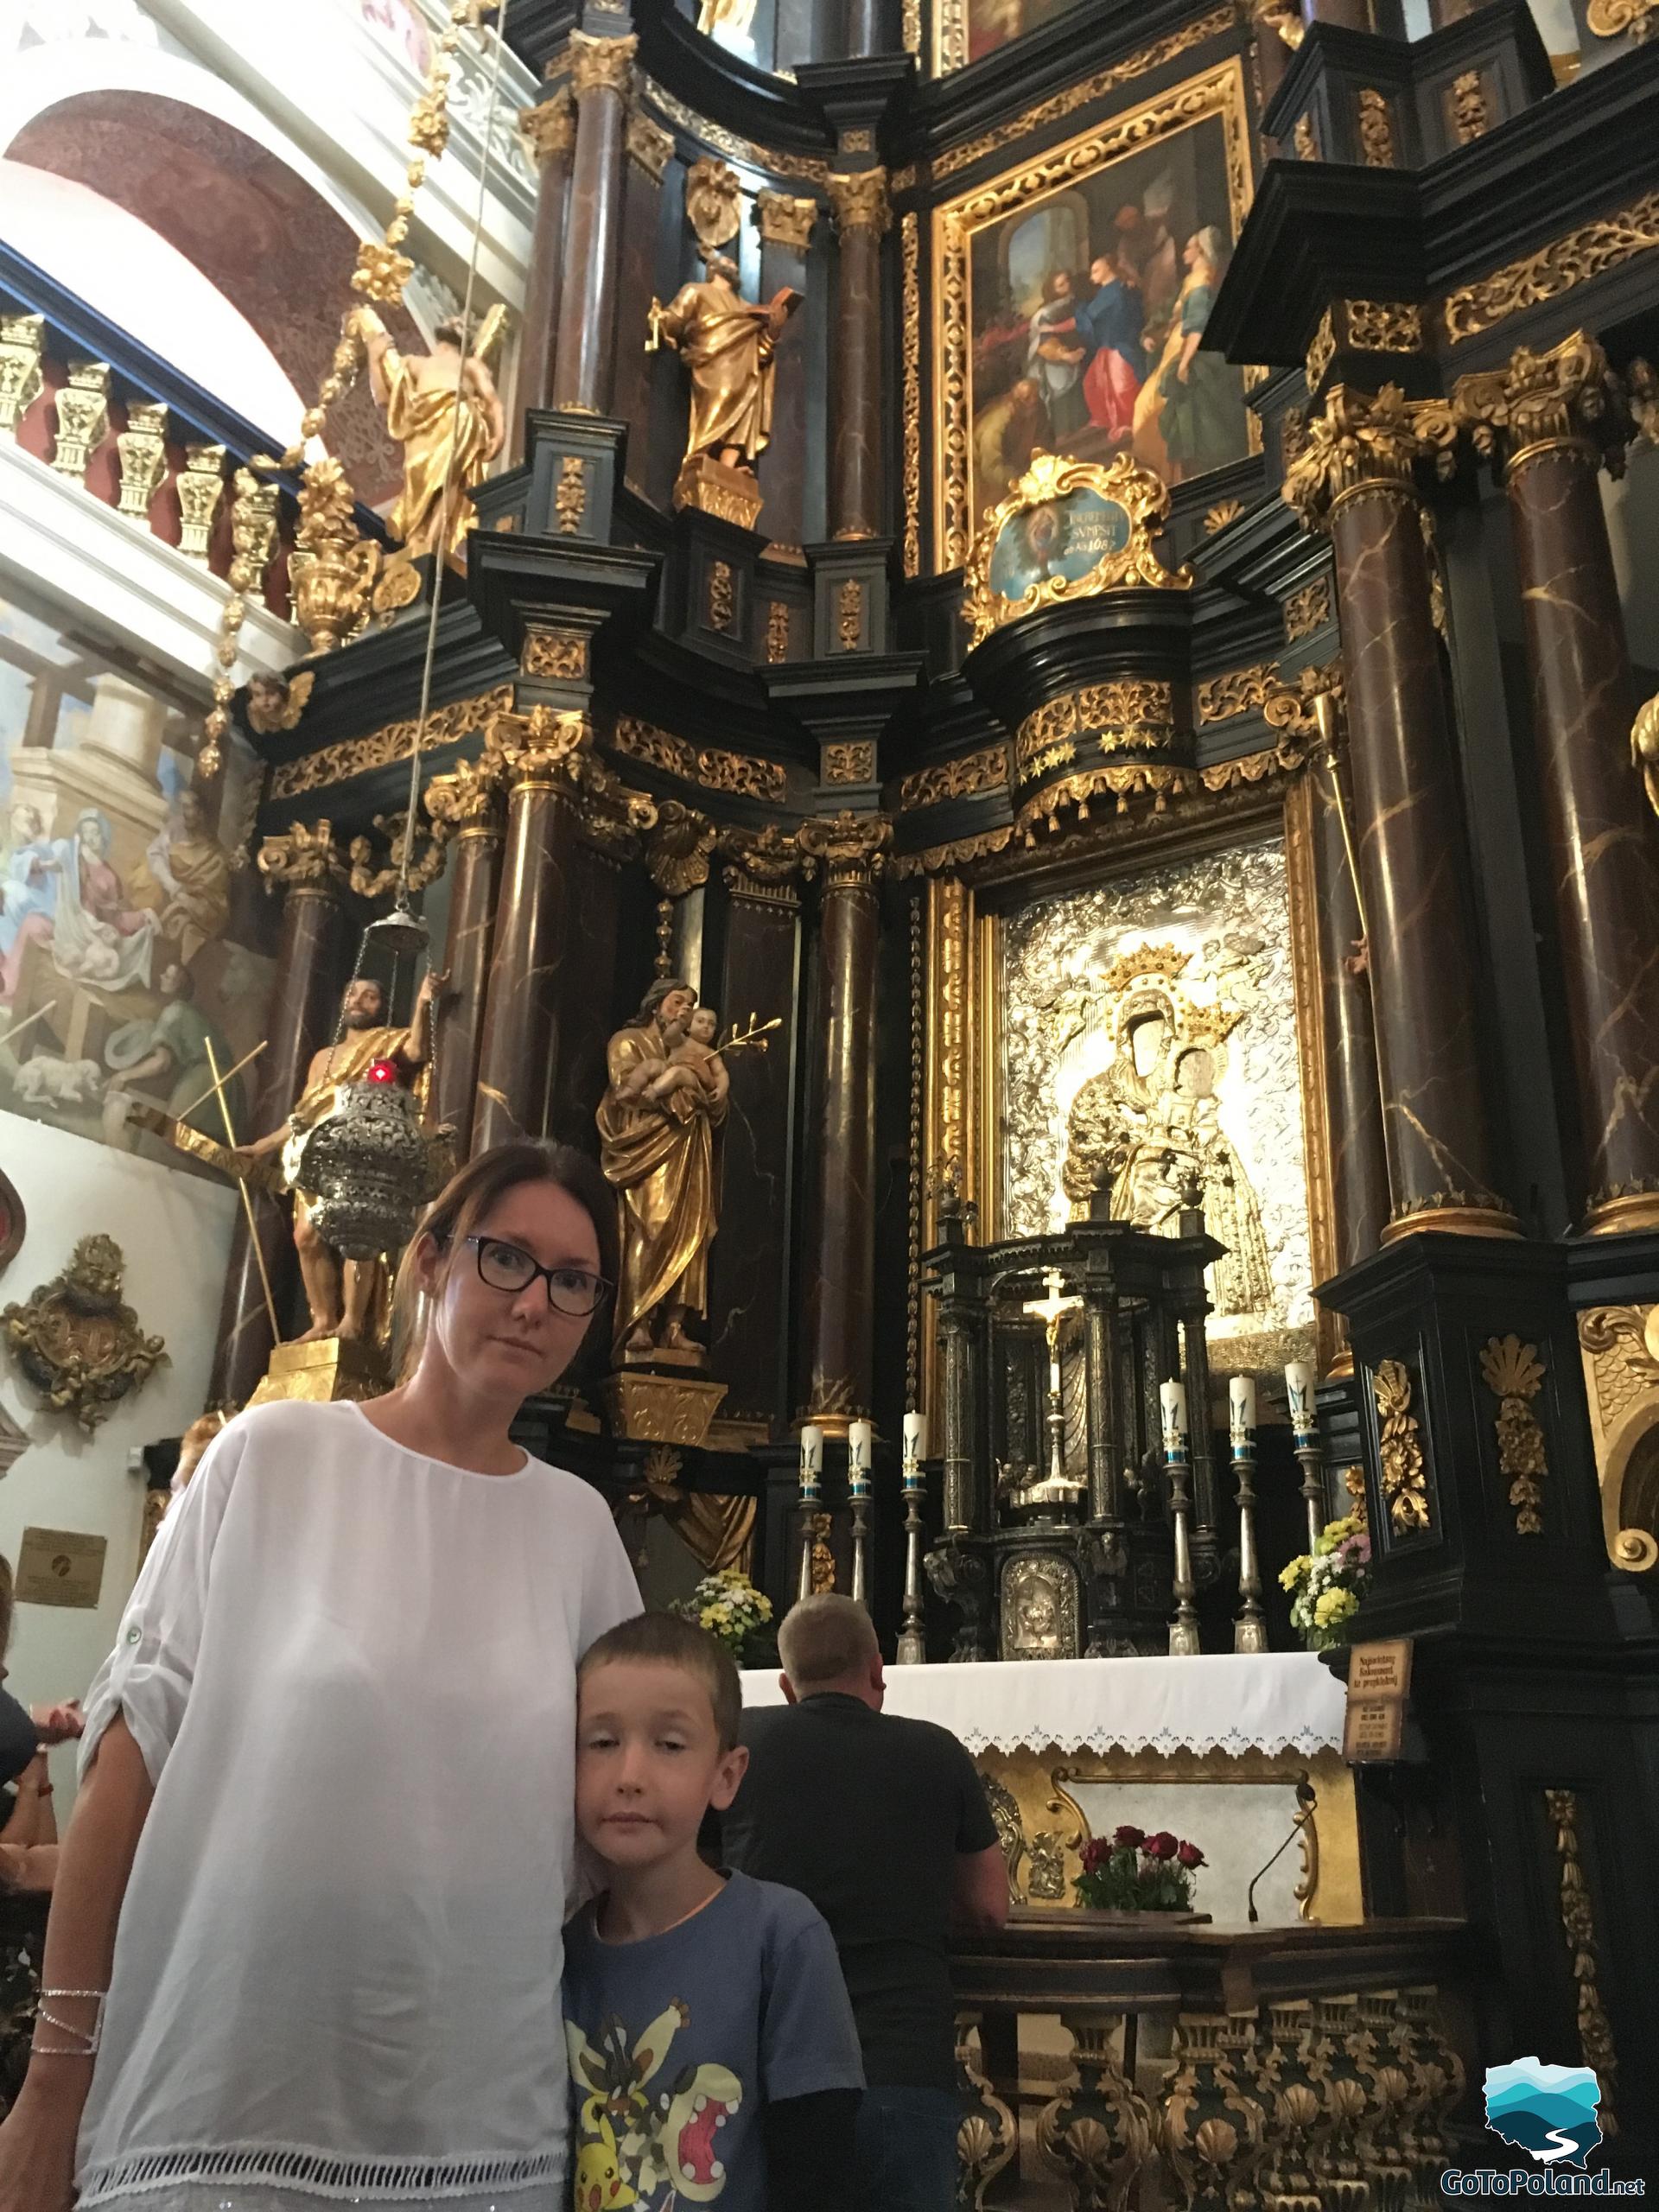 a woman and a boy standing in front of the main altar